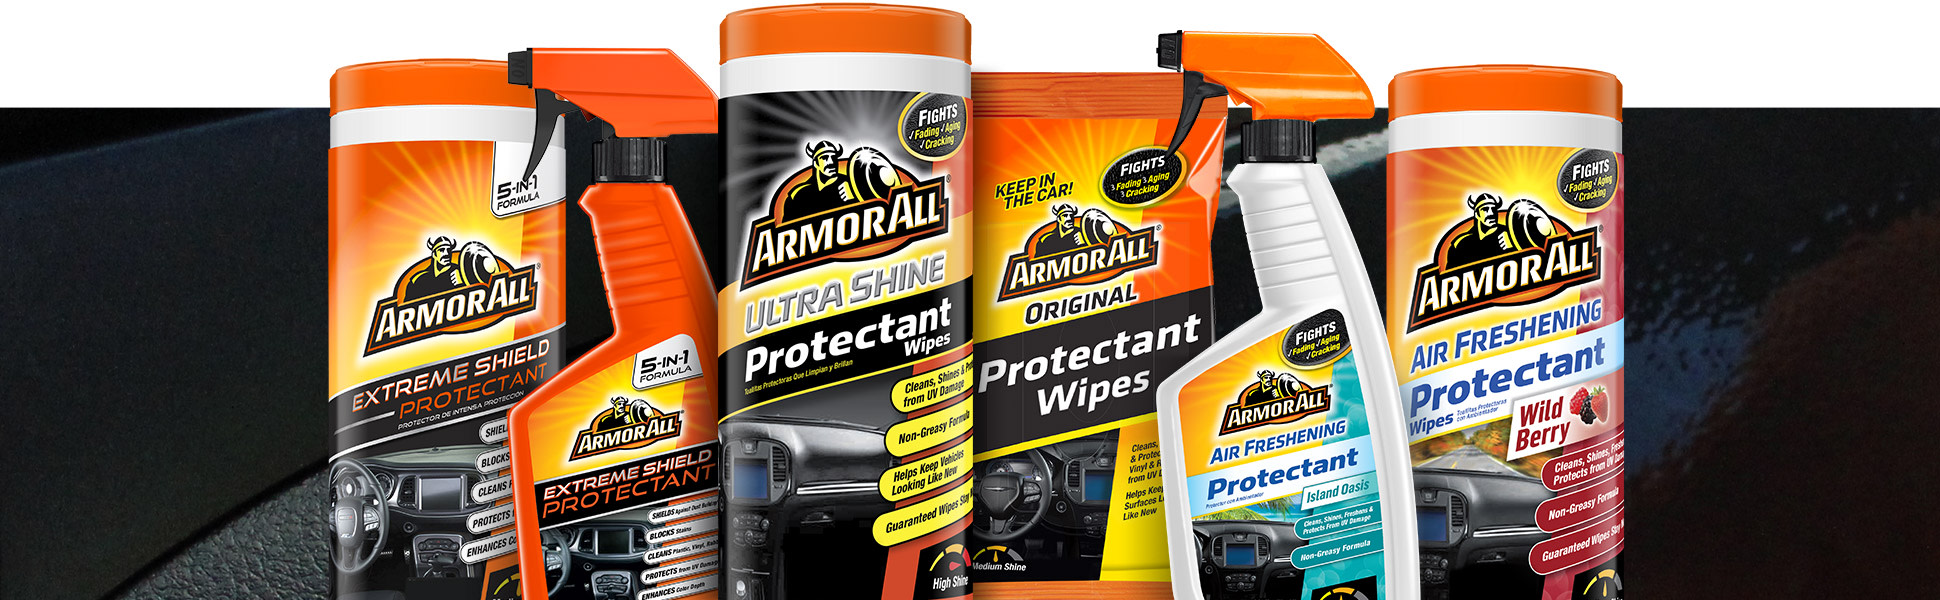 Armor All Armorall Gloss Finish Protectant 300ml Suitable Use For  Dashboard, Rubber Seals, Door Mouldings, Door Panel, Bumpers, Rubbers,  Plastic Remove Grime & Dirt DIY Car Care Interior Use